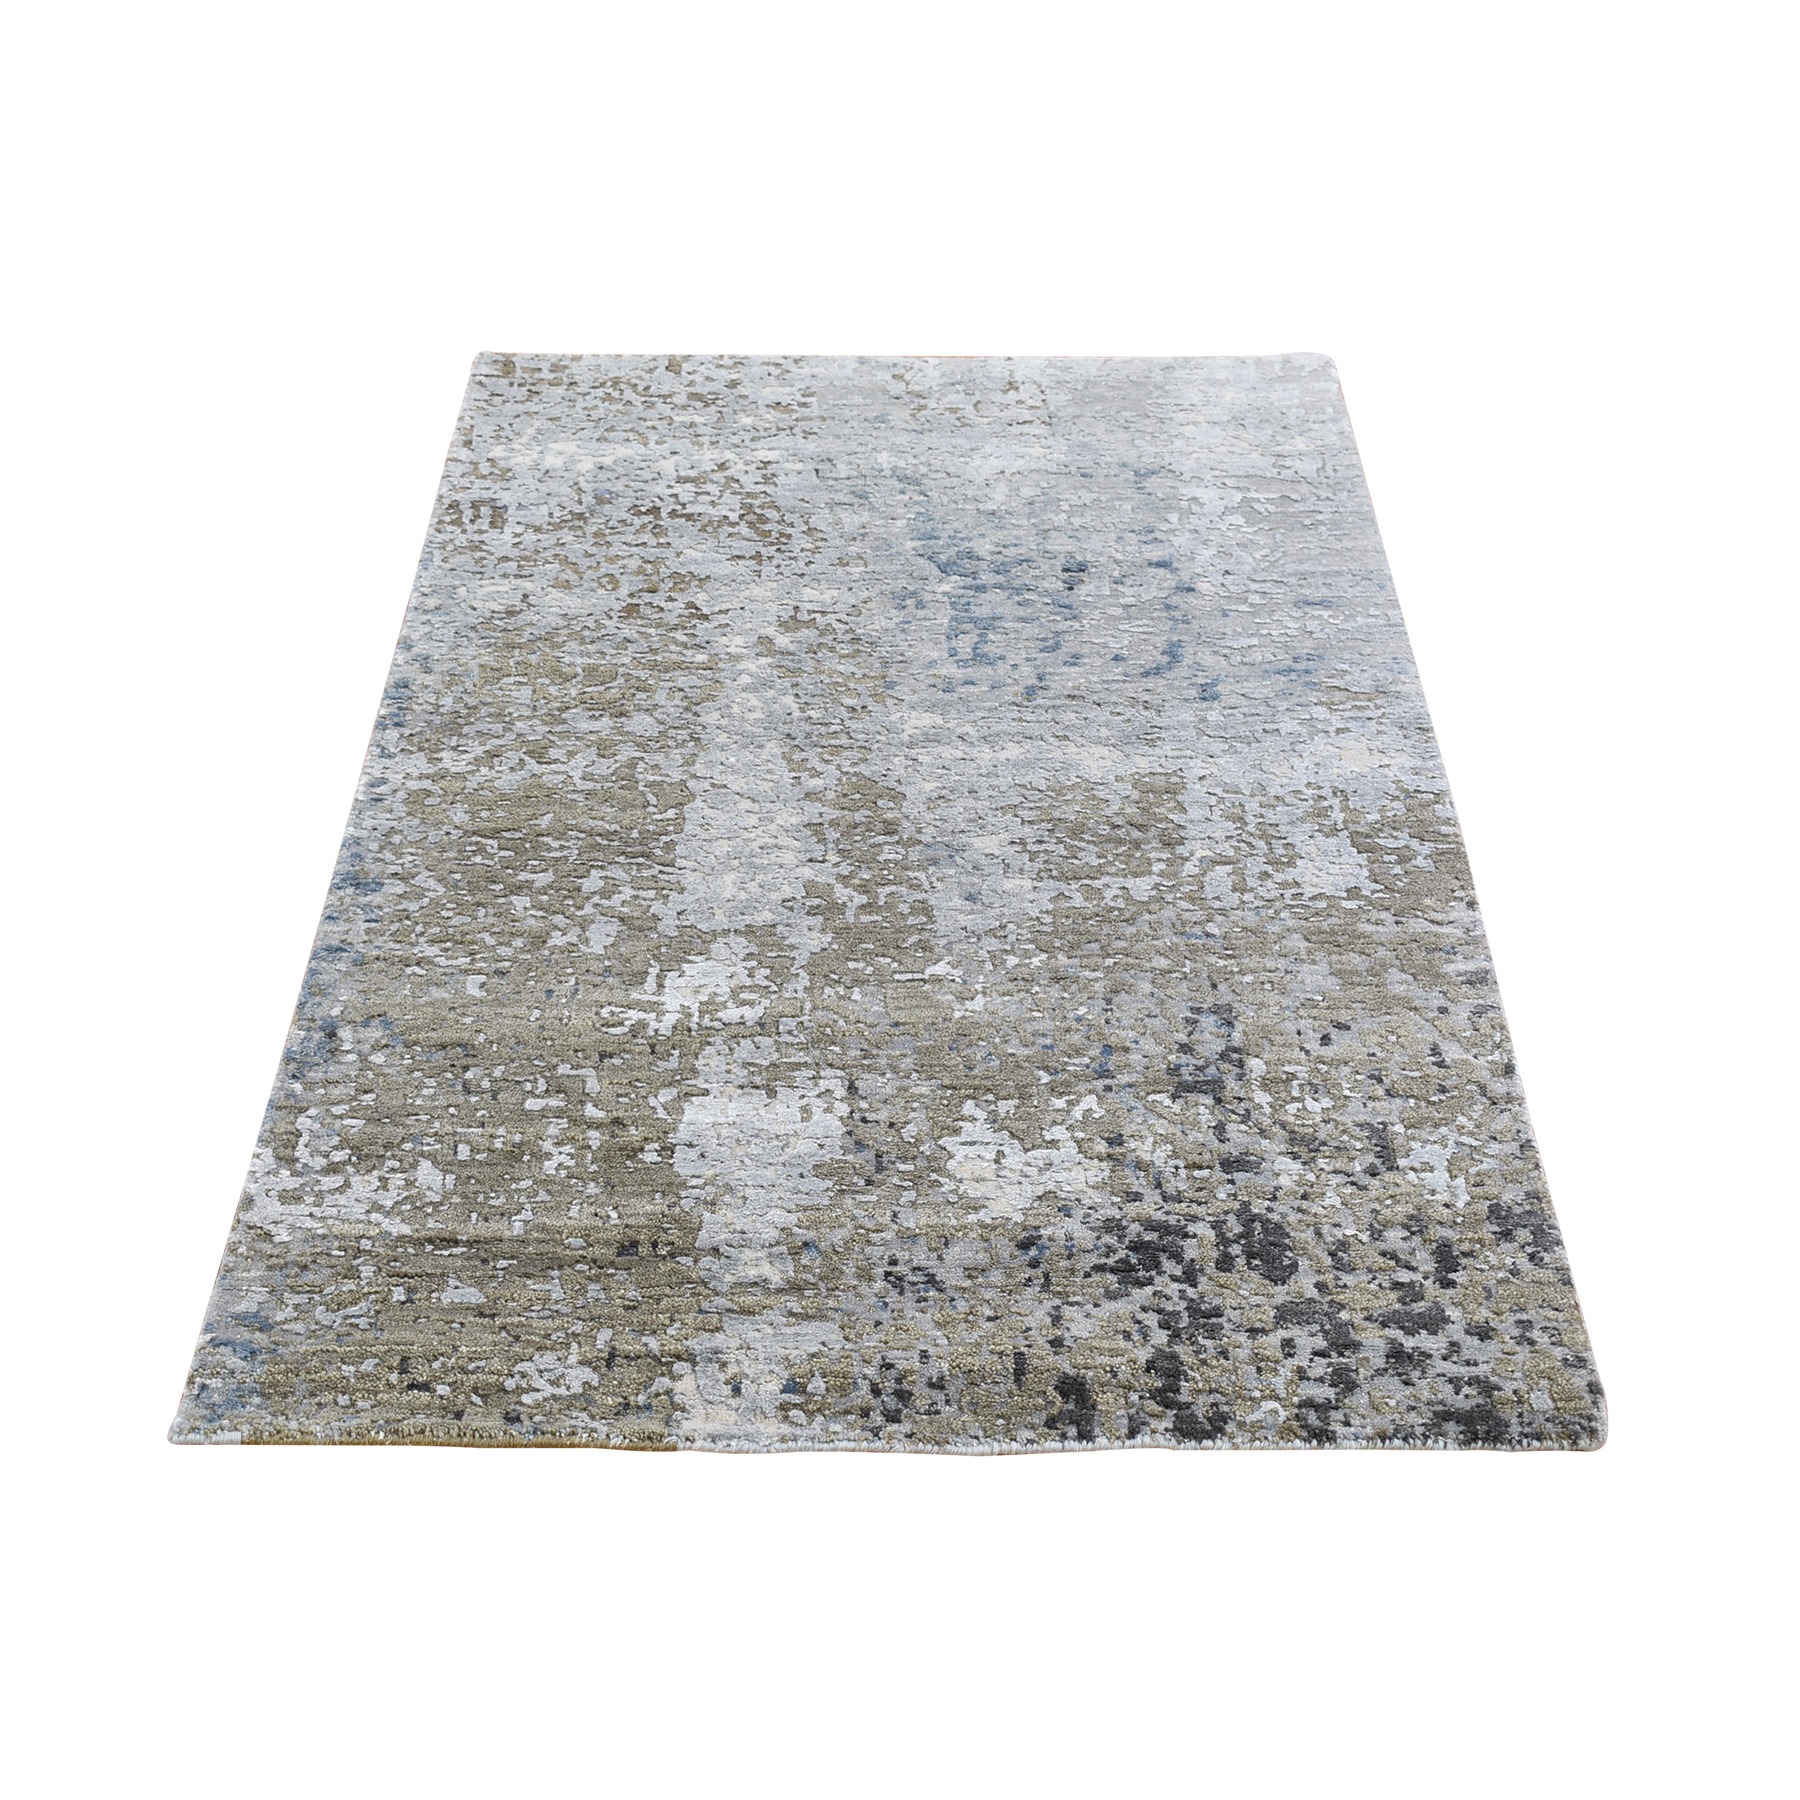 3'x5' Denser Weave Abstract Design Wool and Silk Hi-Low Pile Silver Hand Woven Oriental Rug 